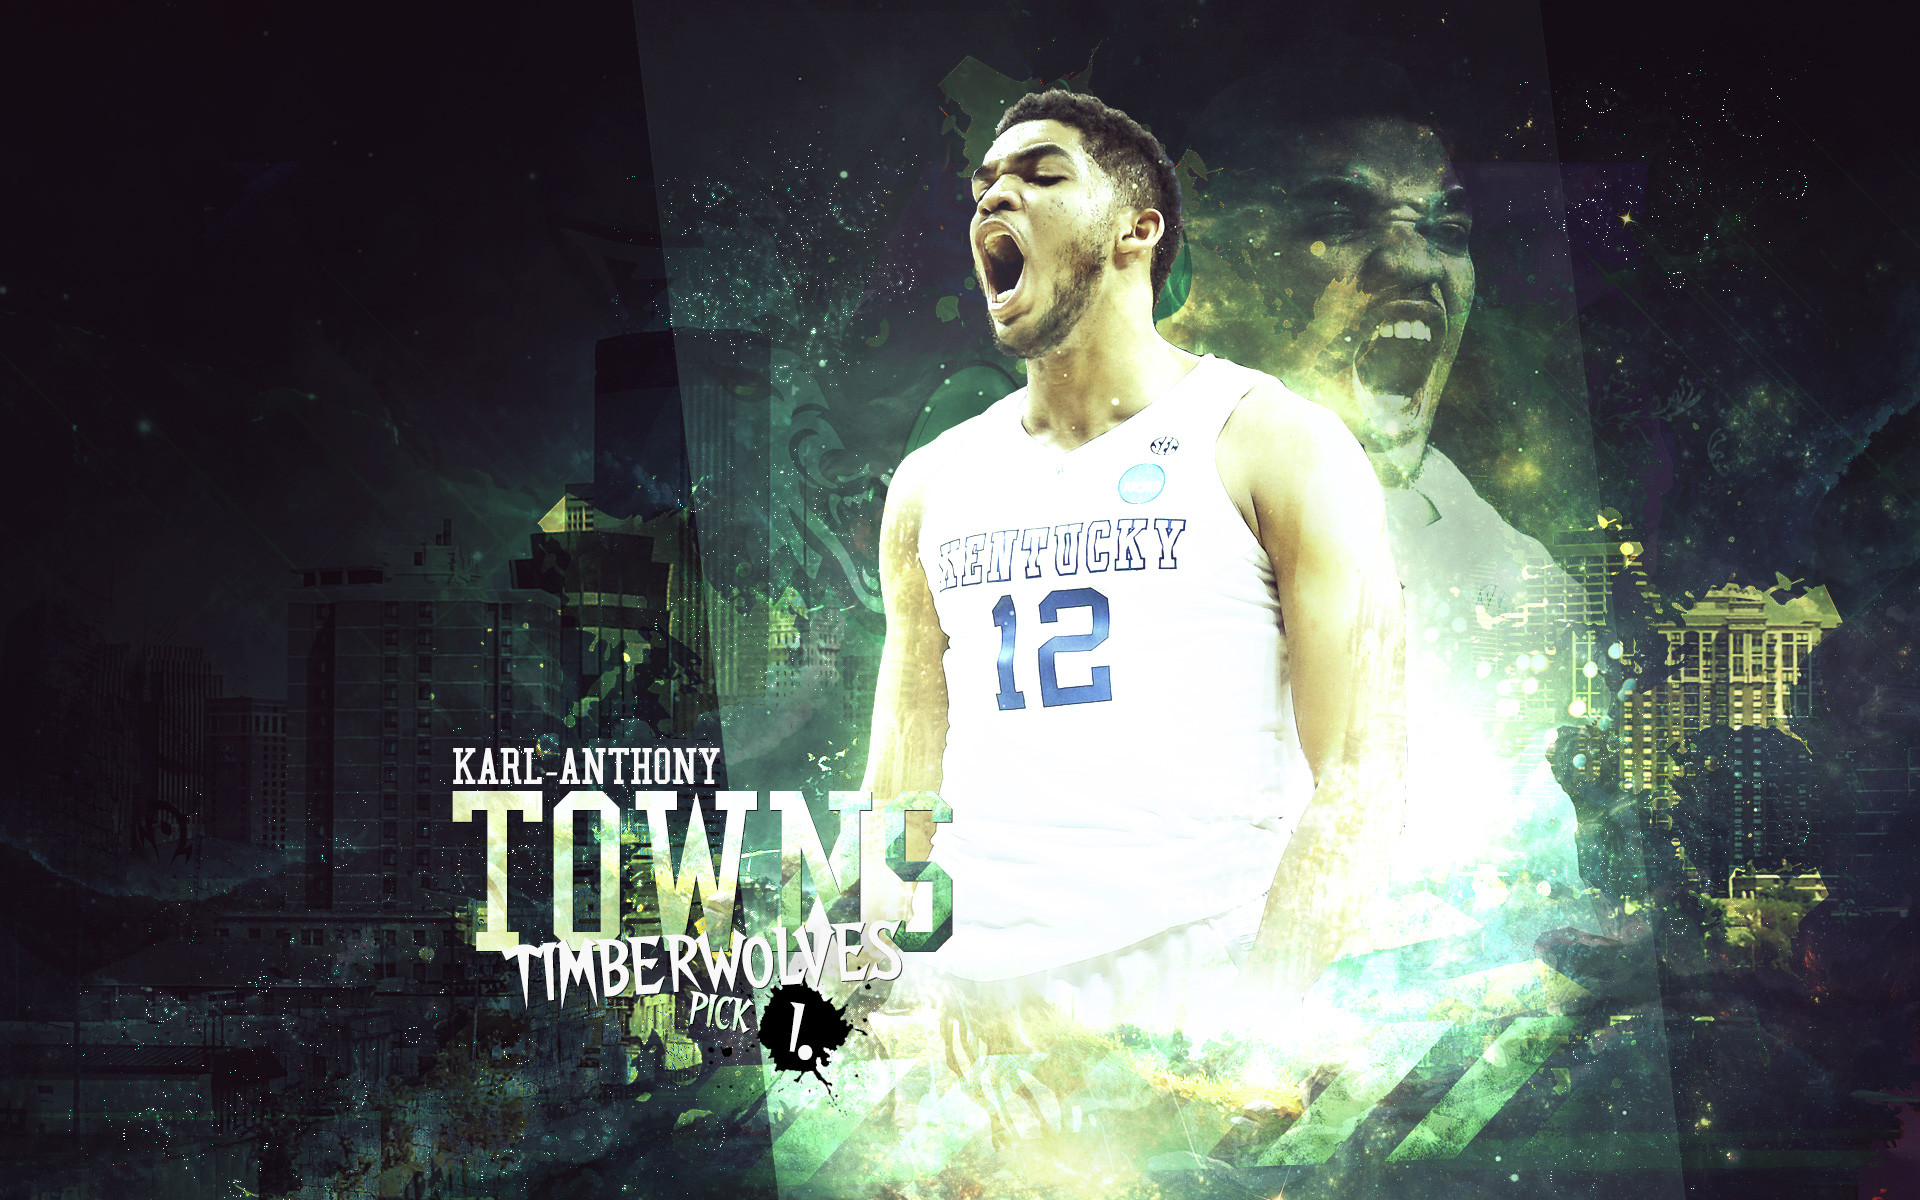 Karl Anthony Towns Wildcats 2015 19201200 Wallpaper